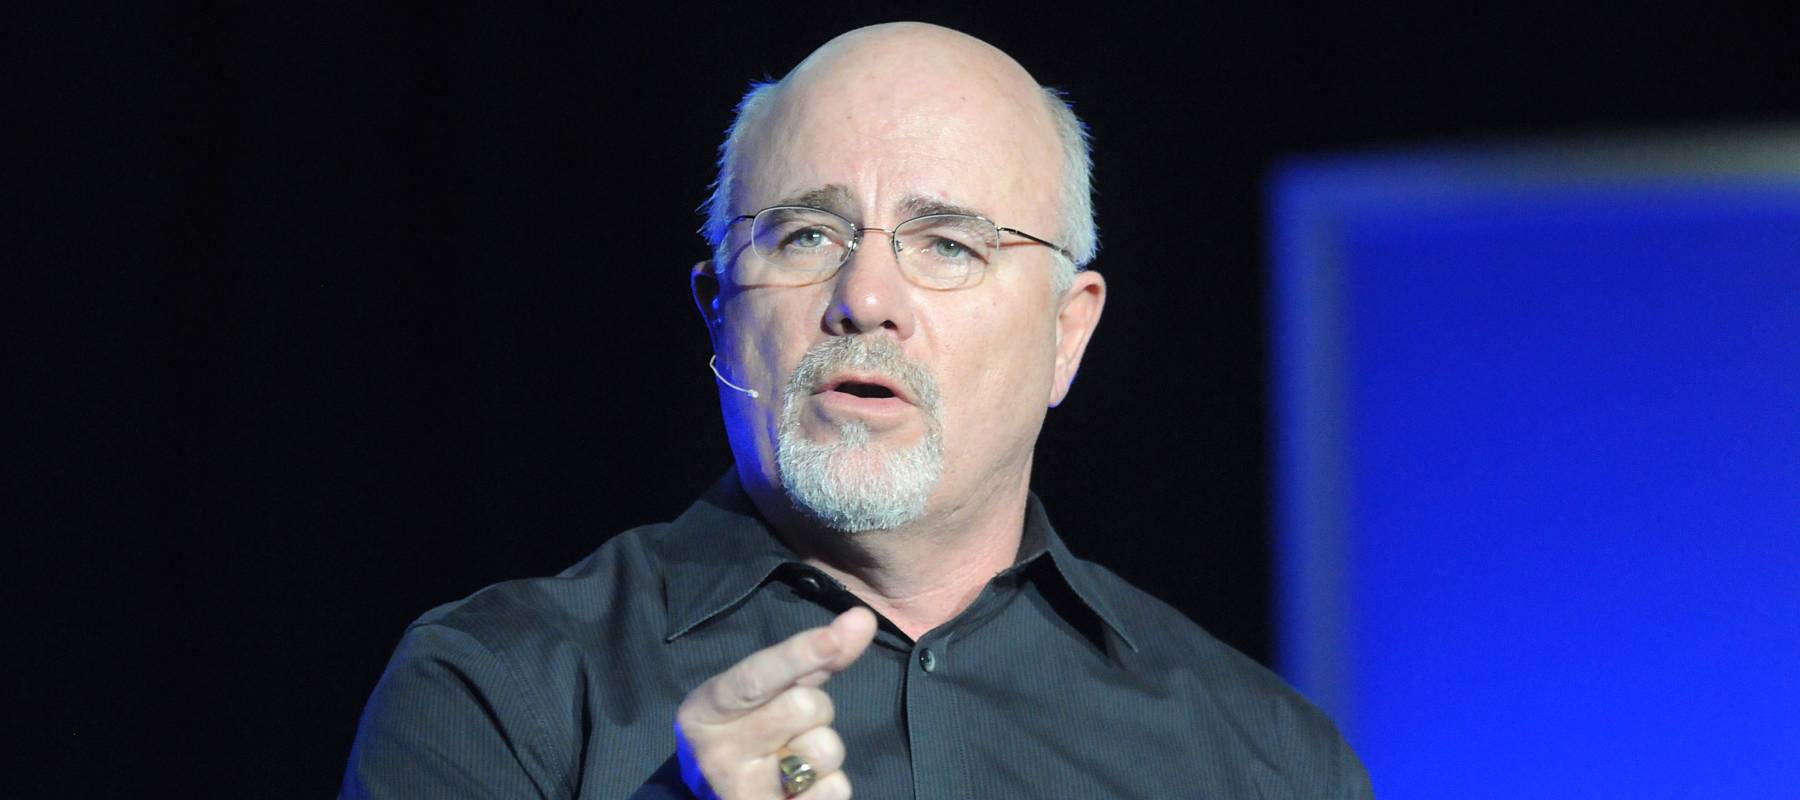 Personal finance expert Dave Ramsey speaks to a crowd at the Cox Convention Center in Oklahoma City, Okla., Feb. 19, 2011.